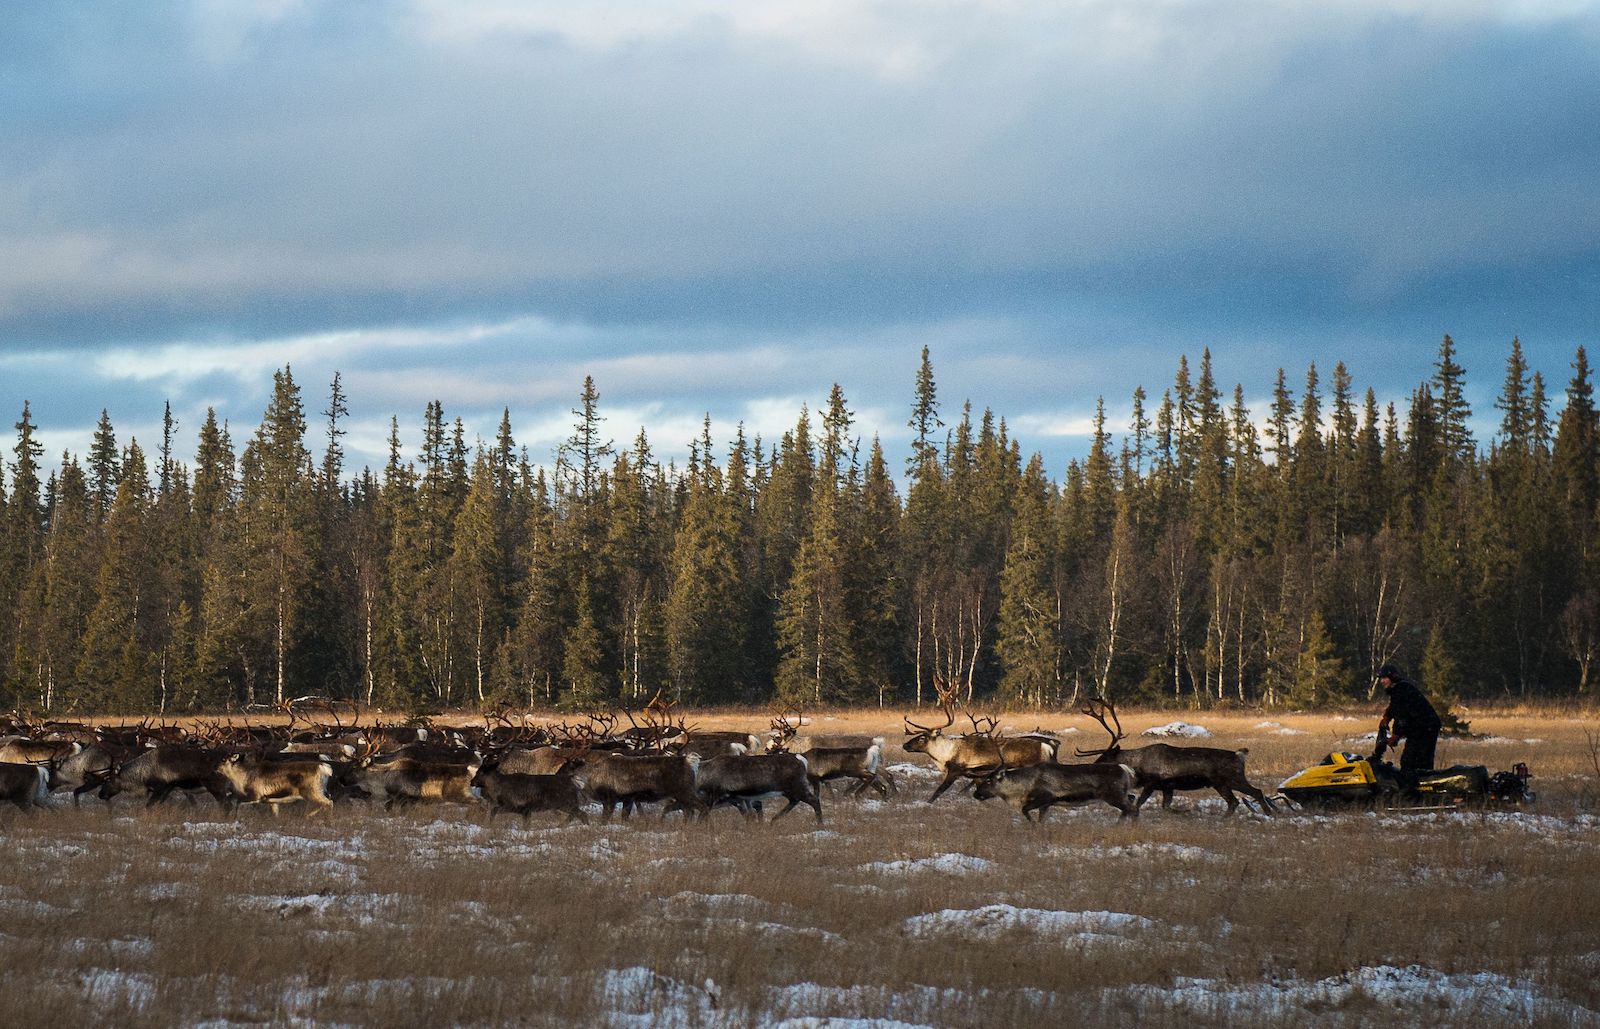 a line of reindeer passes in front of a tree-lined path